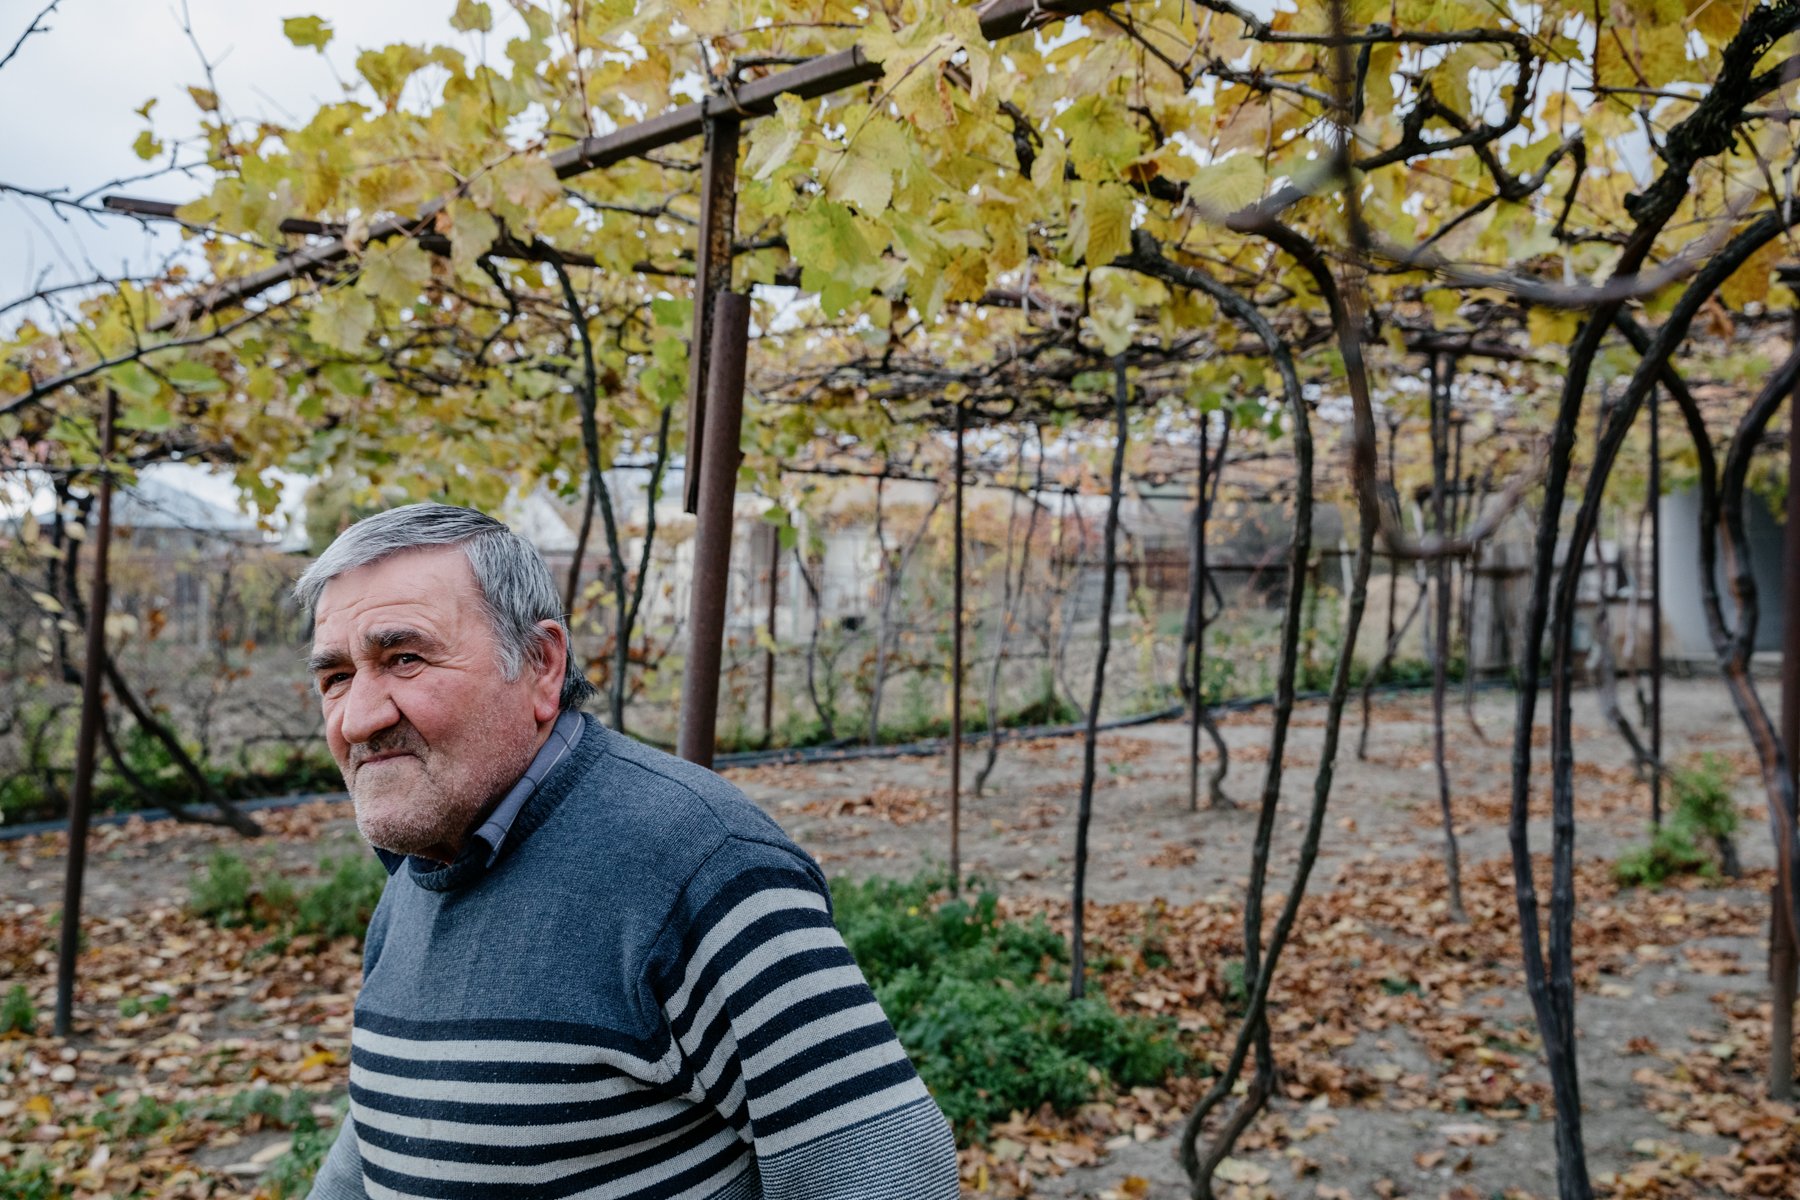  Giorgi Abalaki walks beneath the grapevines in his garden. He lives in the last house before the boundary line with South Ossetia in the village of Kirbali. 76-year-old Giorgi has lived alone since his wife died several years ago. 